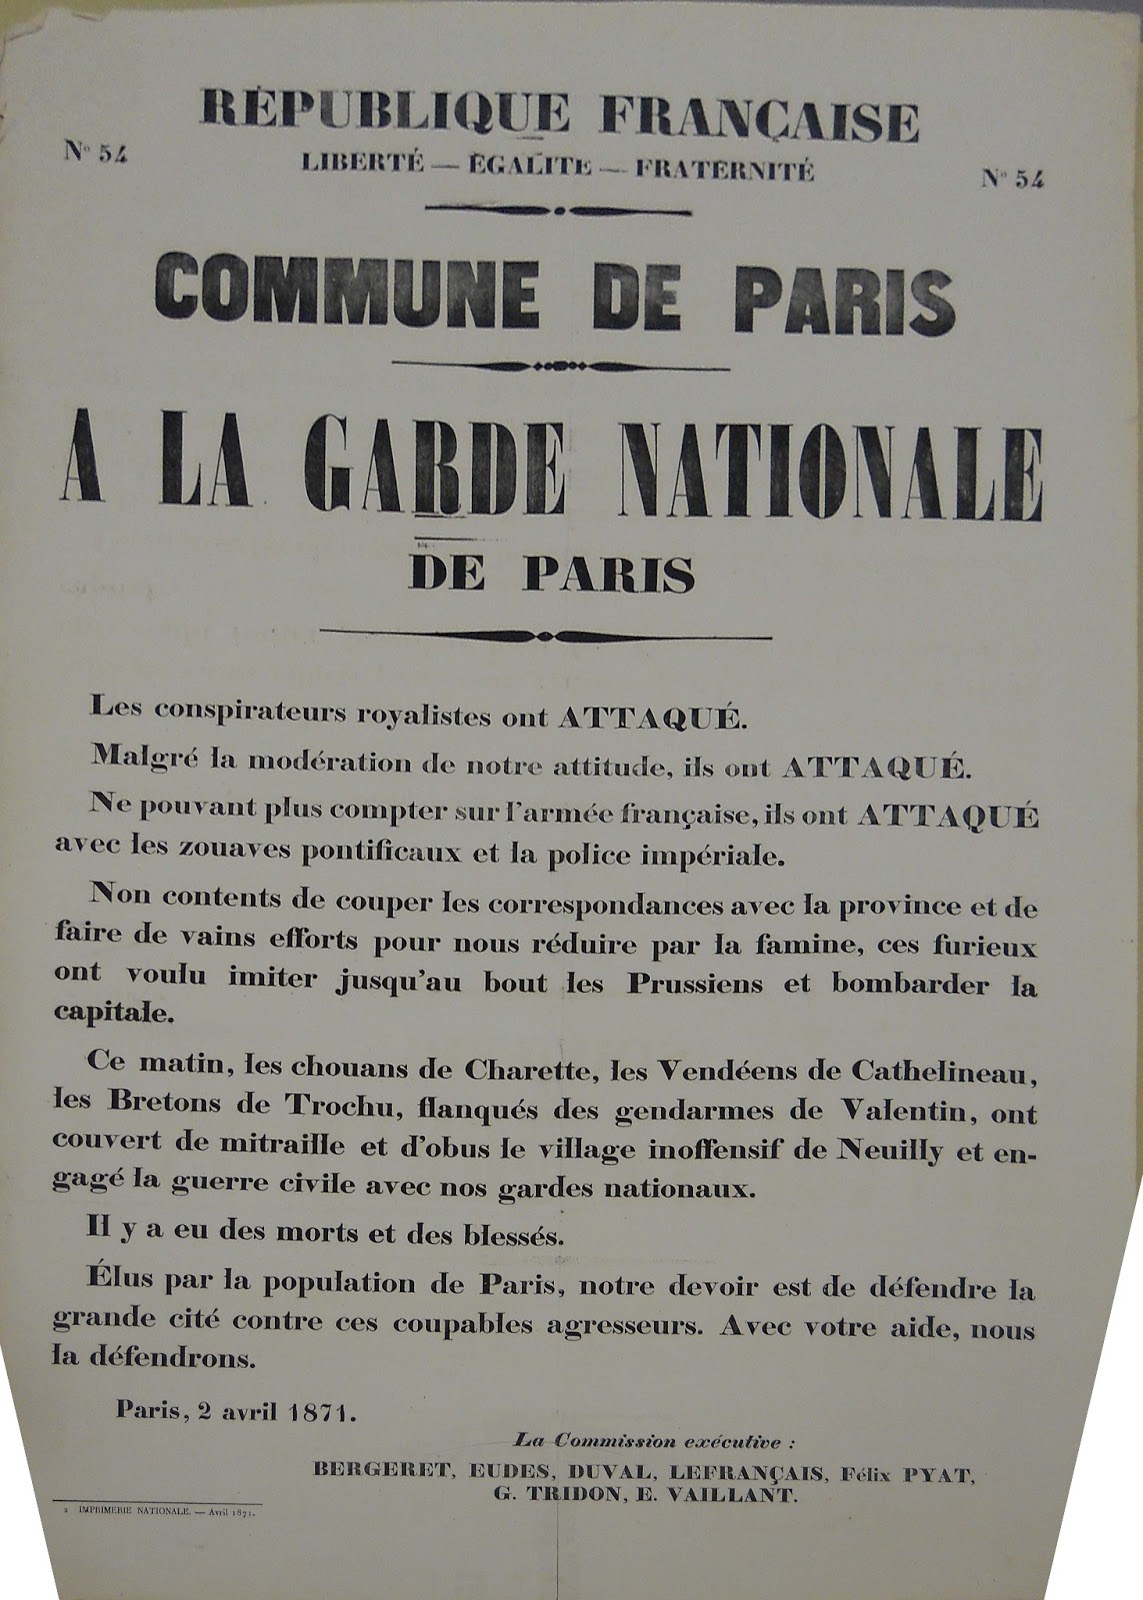 A poster displayed by the French Republic during the 1871 Paris Commune